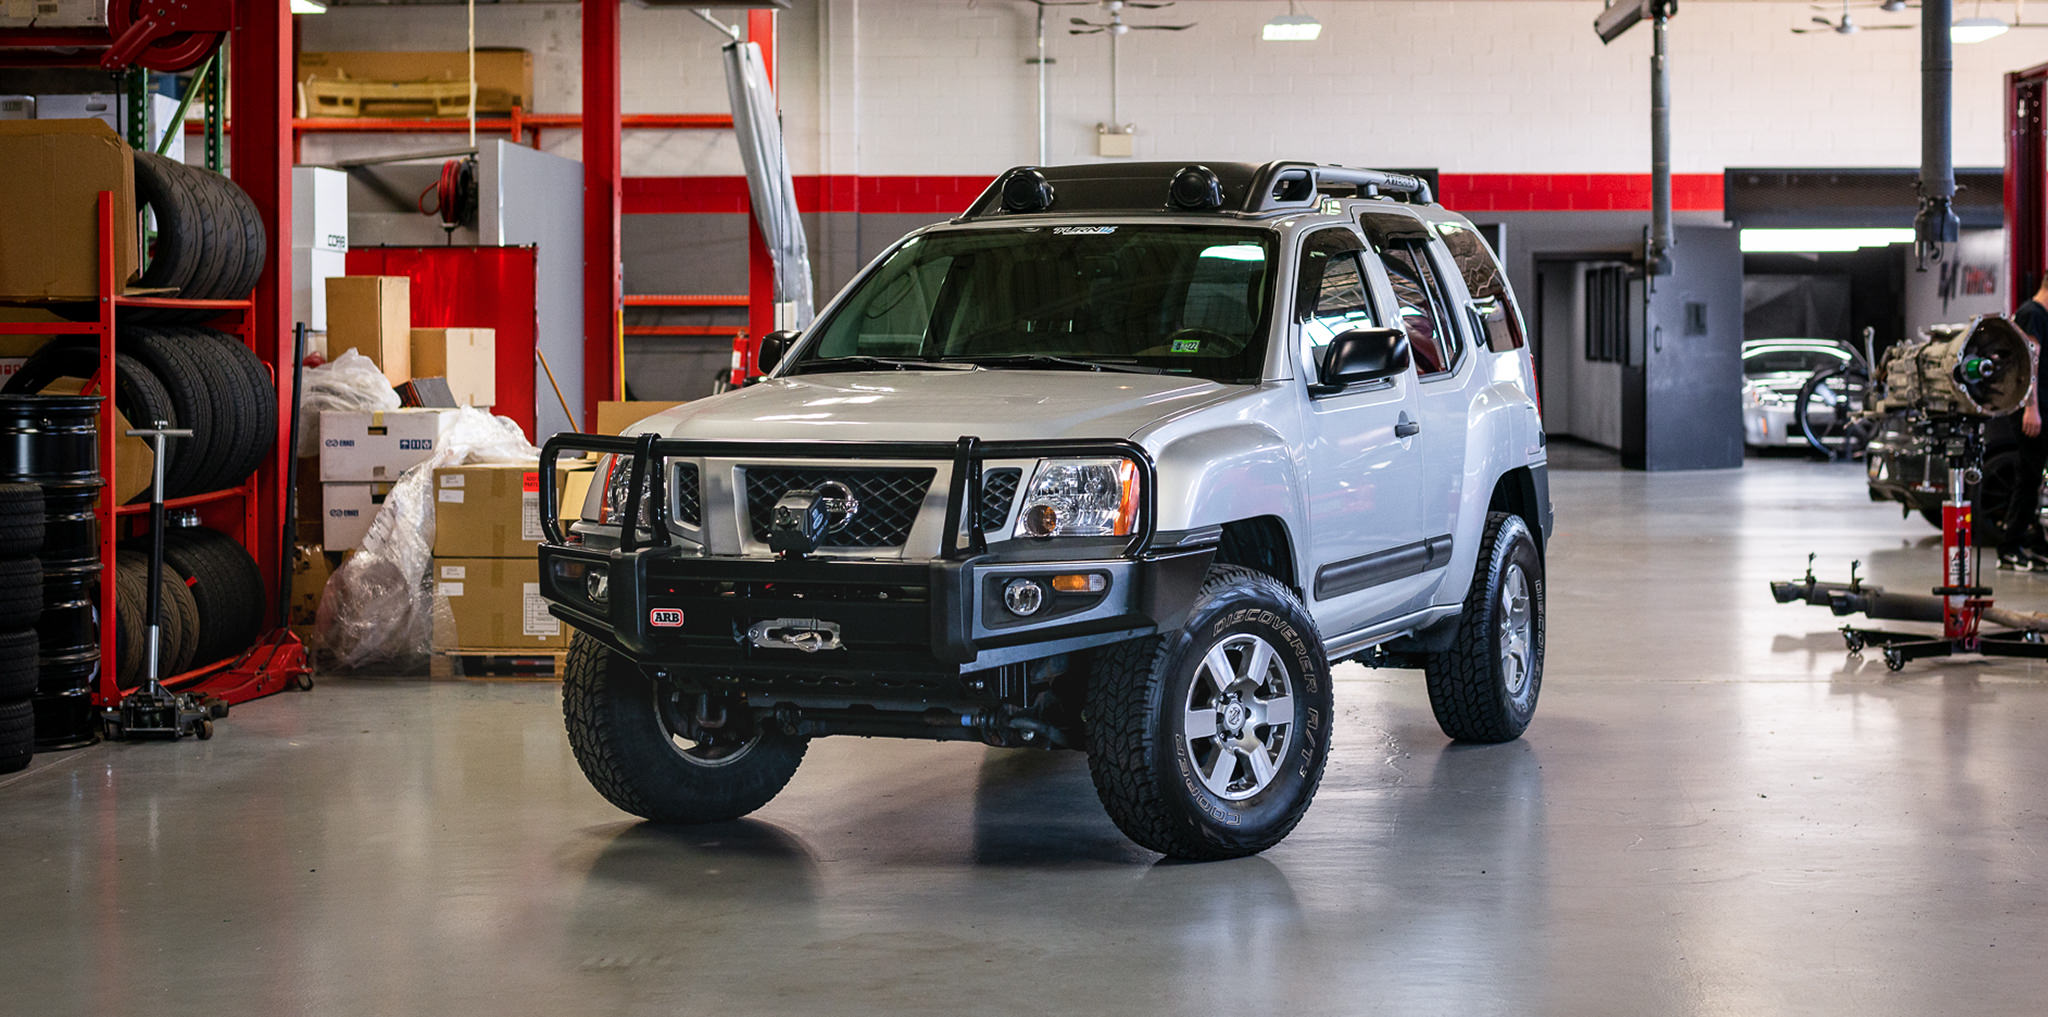 Lifting and Off-Road Prepping Nissan's Capable Gen2 Xterra